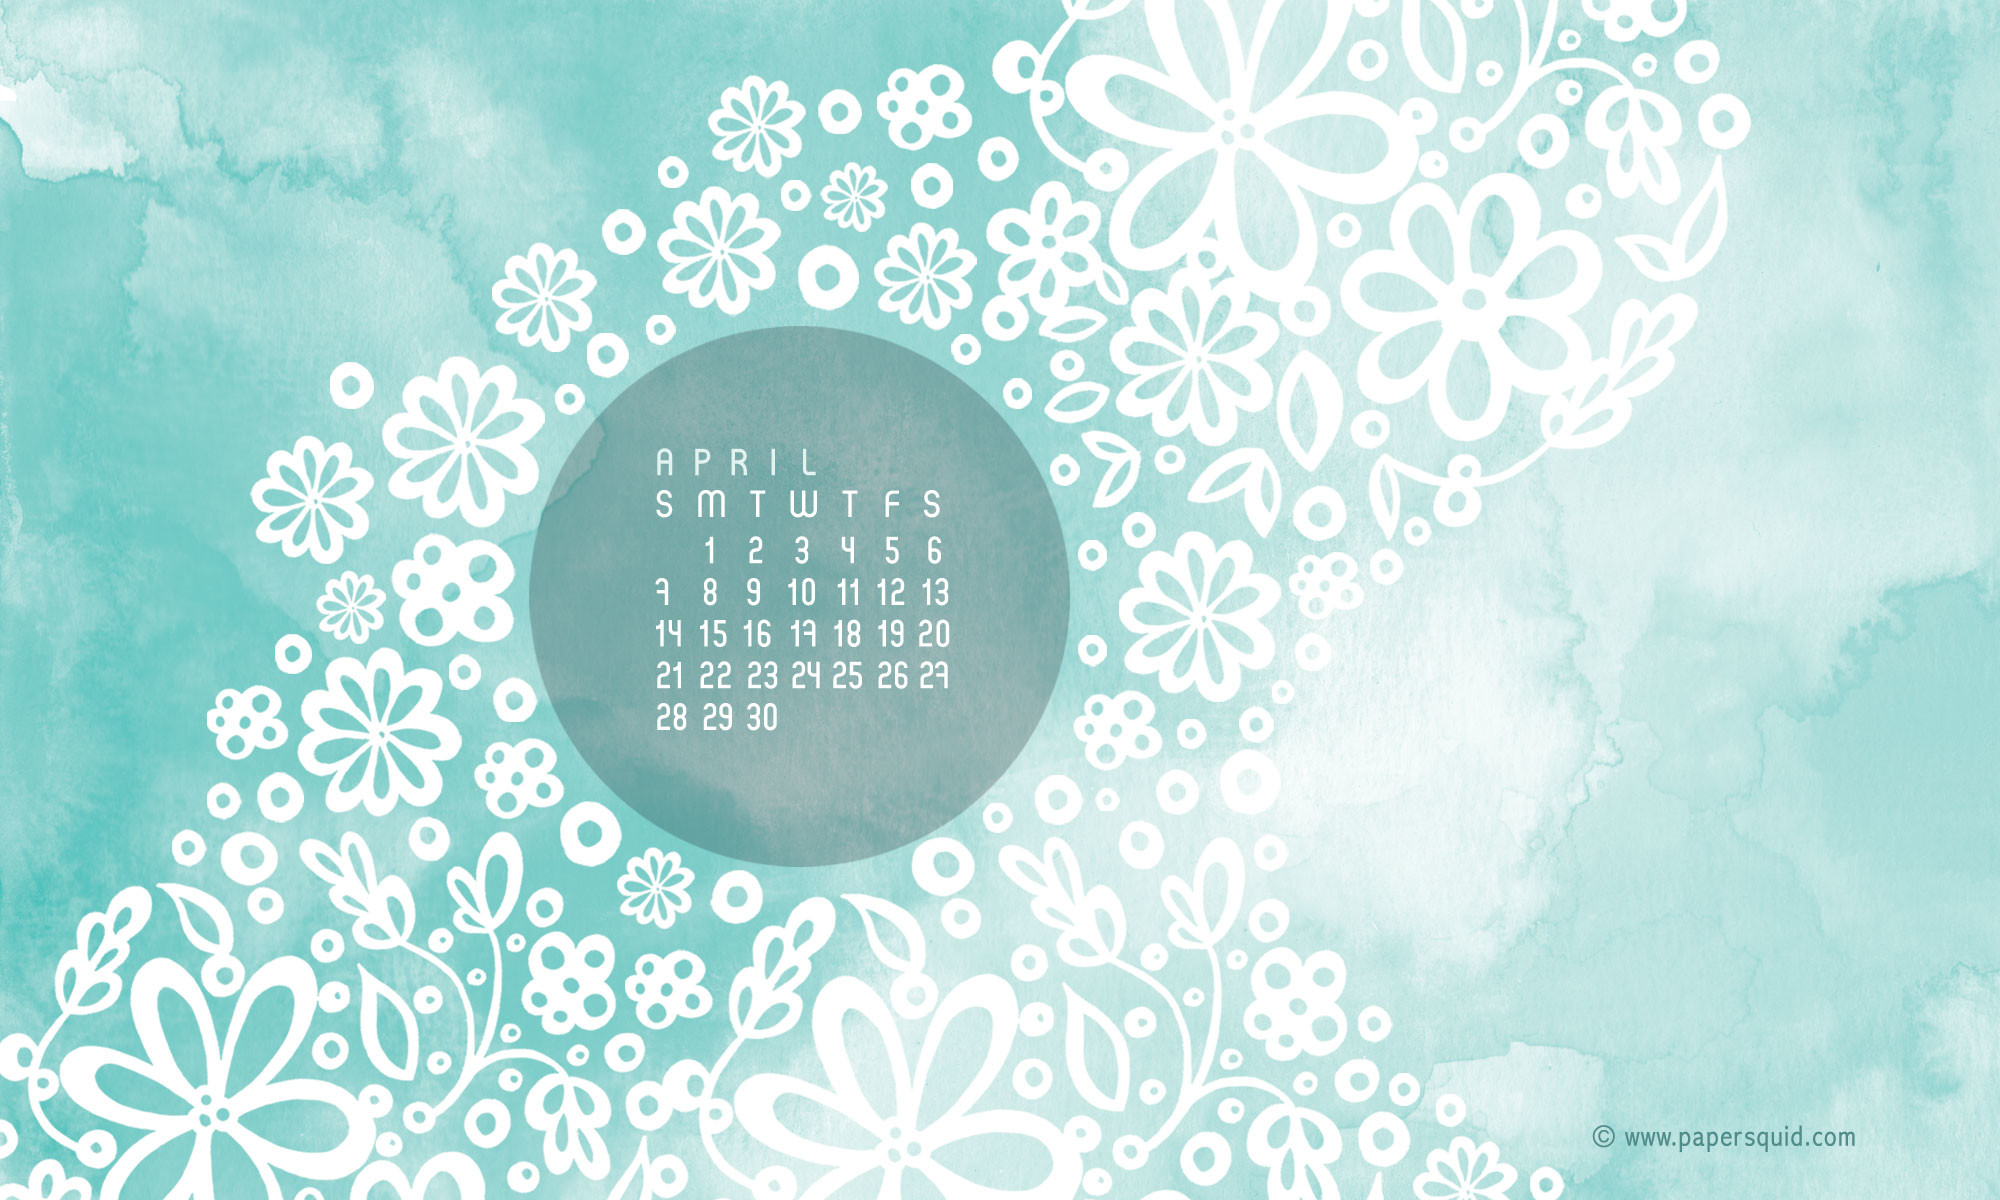 2000x1200 Here is April's free desktop calendar, which you can download here.